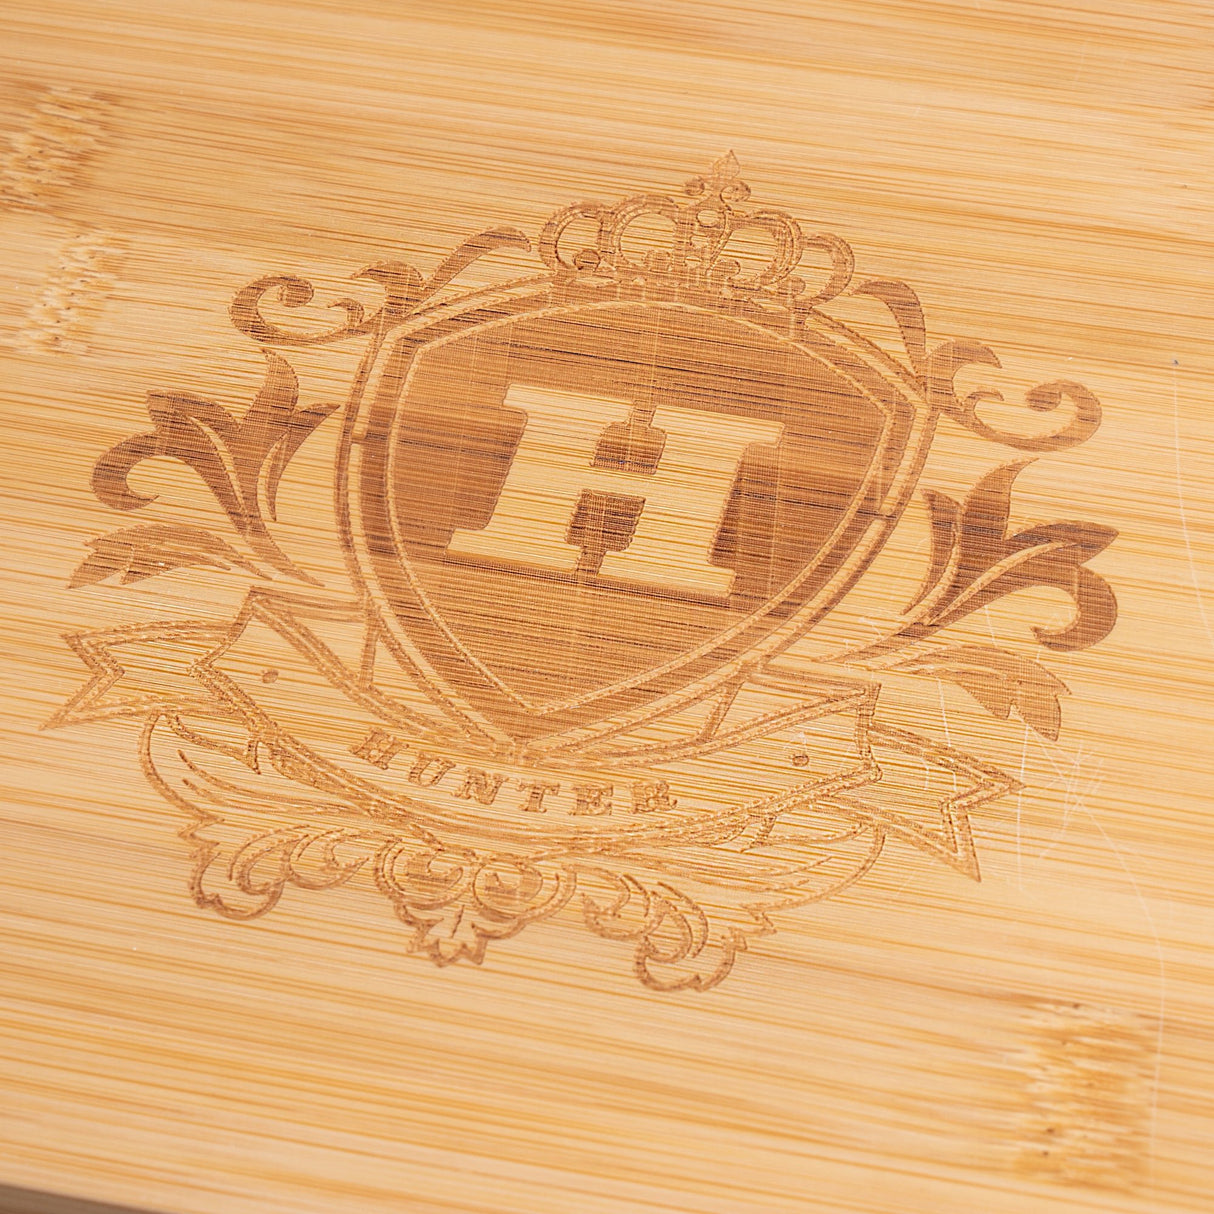 Personalized Engraved Wooden Tea Storage Box - GexWorldwide